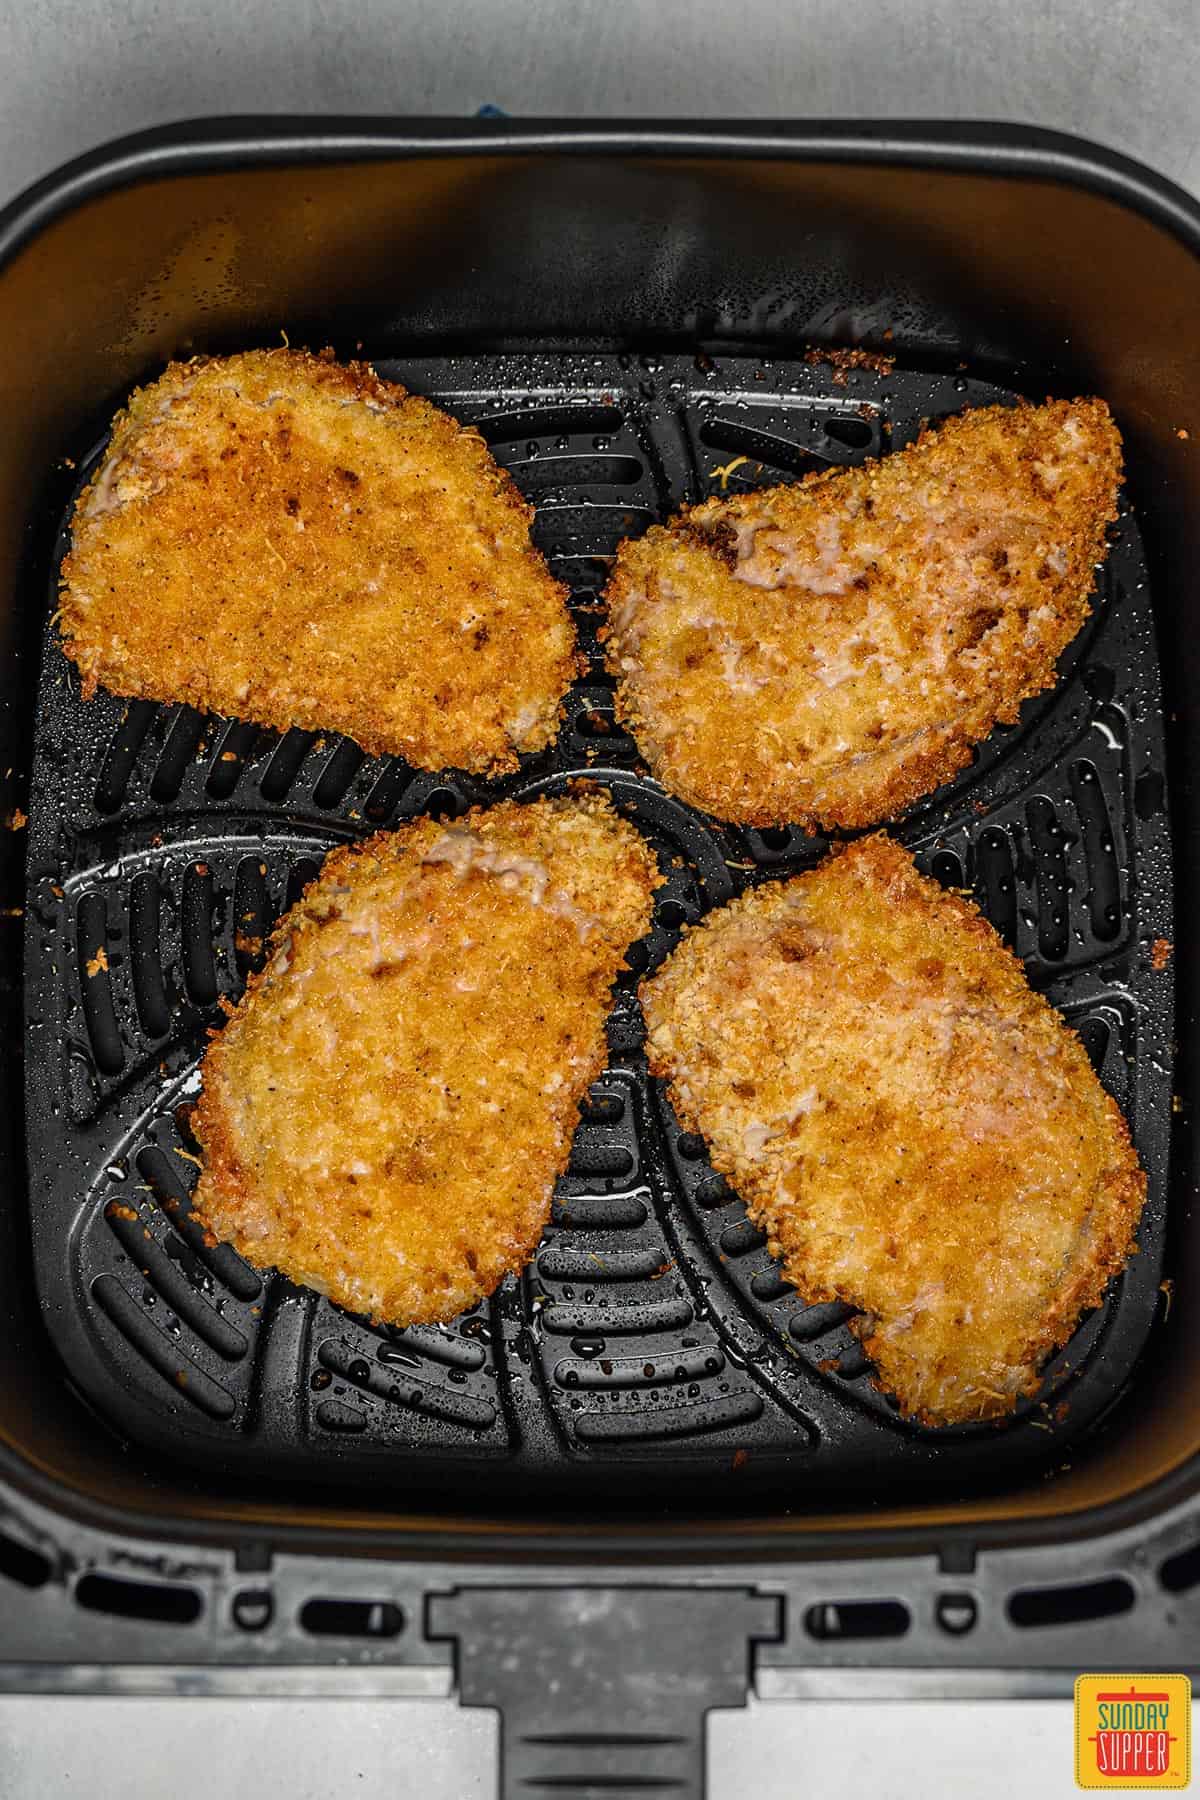 Pork chops in the air fryer after frying